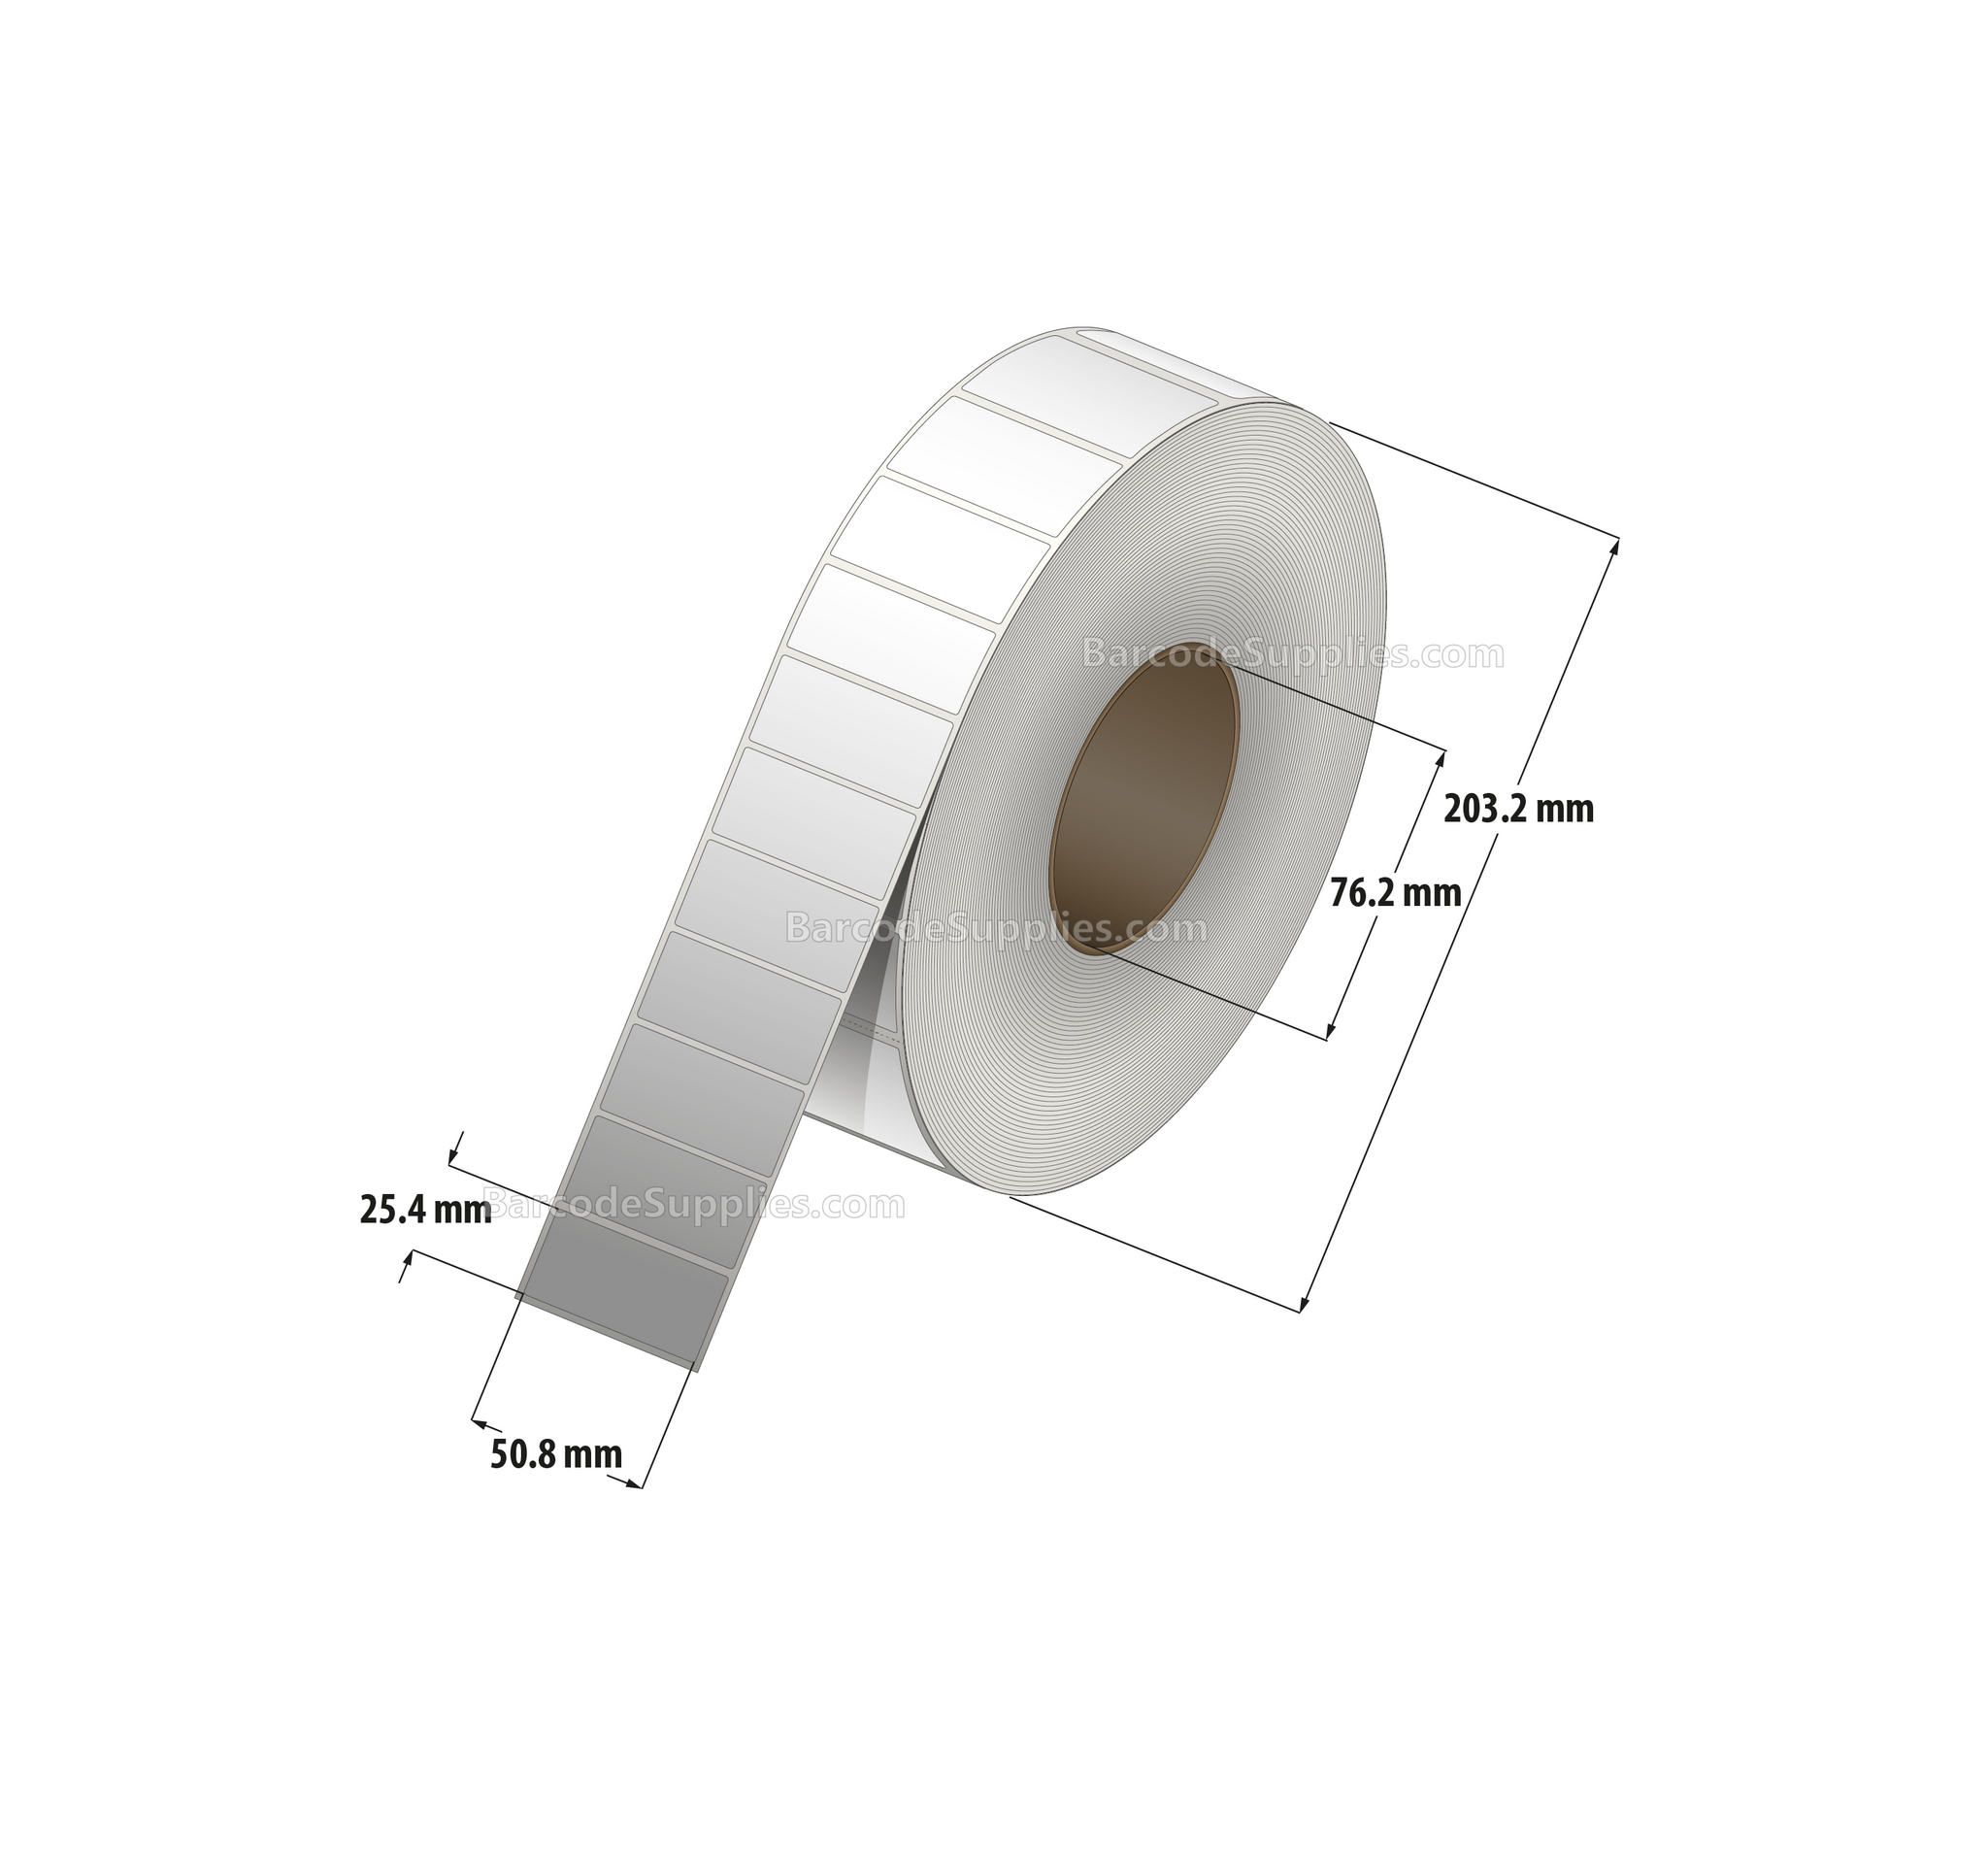 2 x 1 Thermal Transfer White Labels With Permanent Adhesive - No Perforation - 5000 Labels Per Roll - Carton Of 8 Rolls - 40000 Labels Total - MPN: RP-2-1-5000-NP